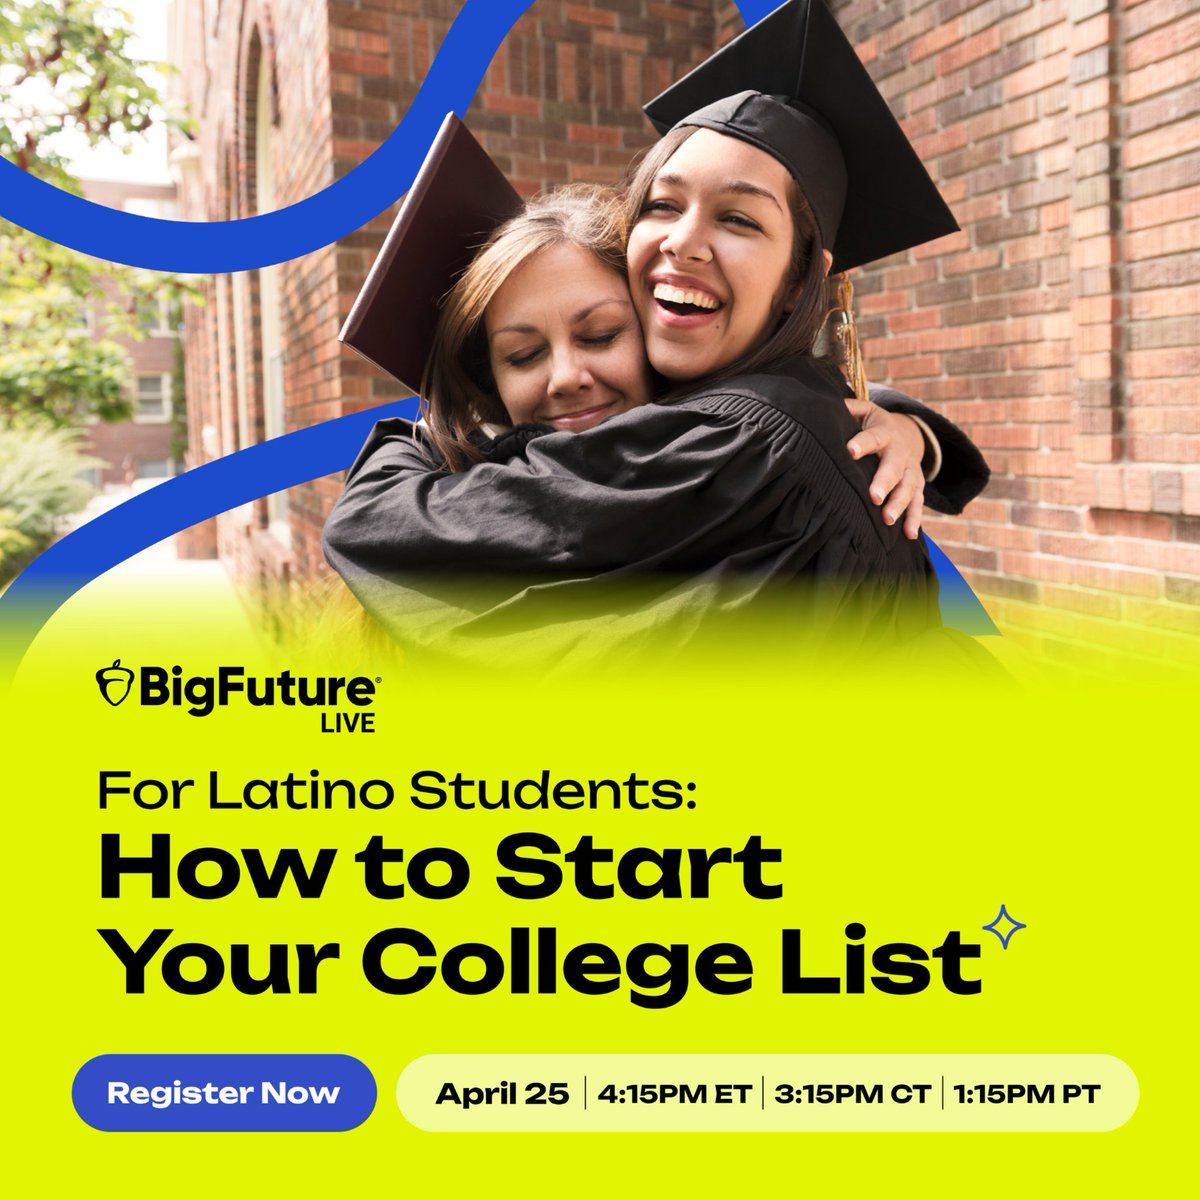 Starting a college list? Join us for #BigFuture Live’s April 25 event tailored for Latino students. We’ll answer questions about: •Different educational paths •Schools that embrace your heritage •What to look for in a college 🔗 Register now: spr.ly/6017bGr0V